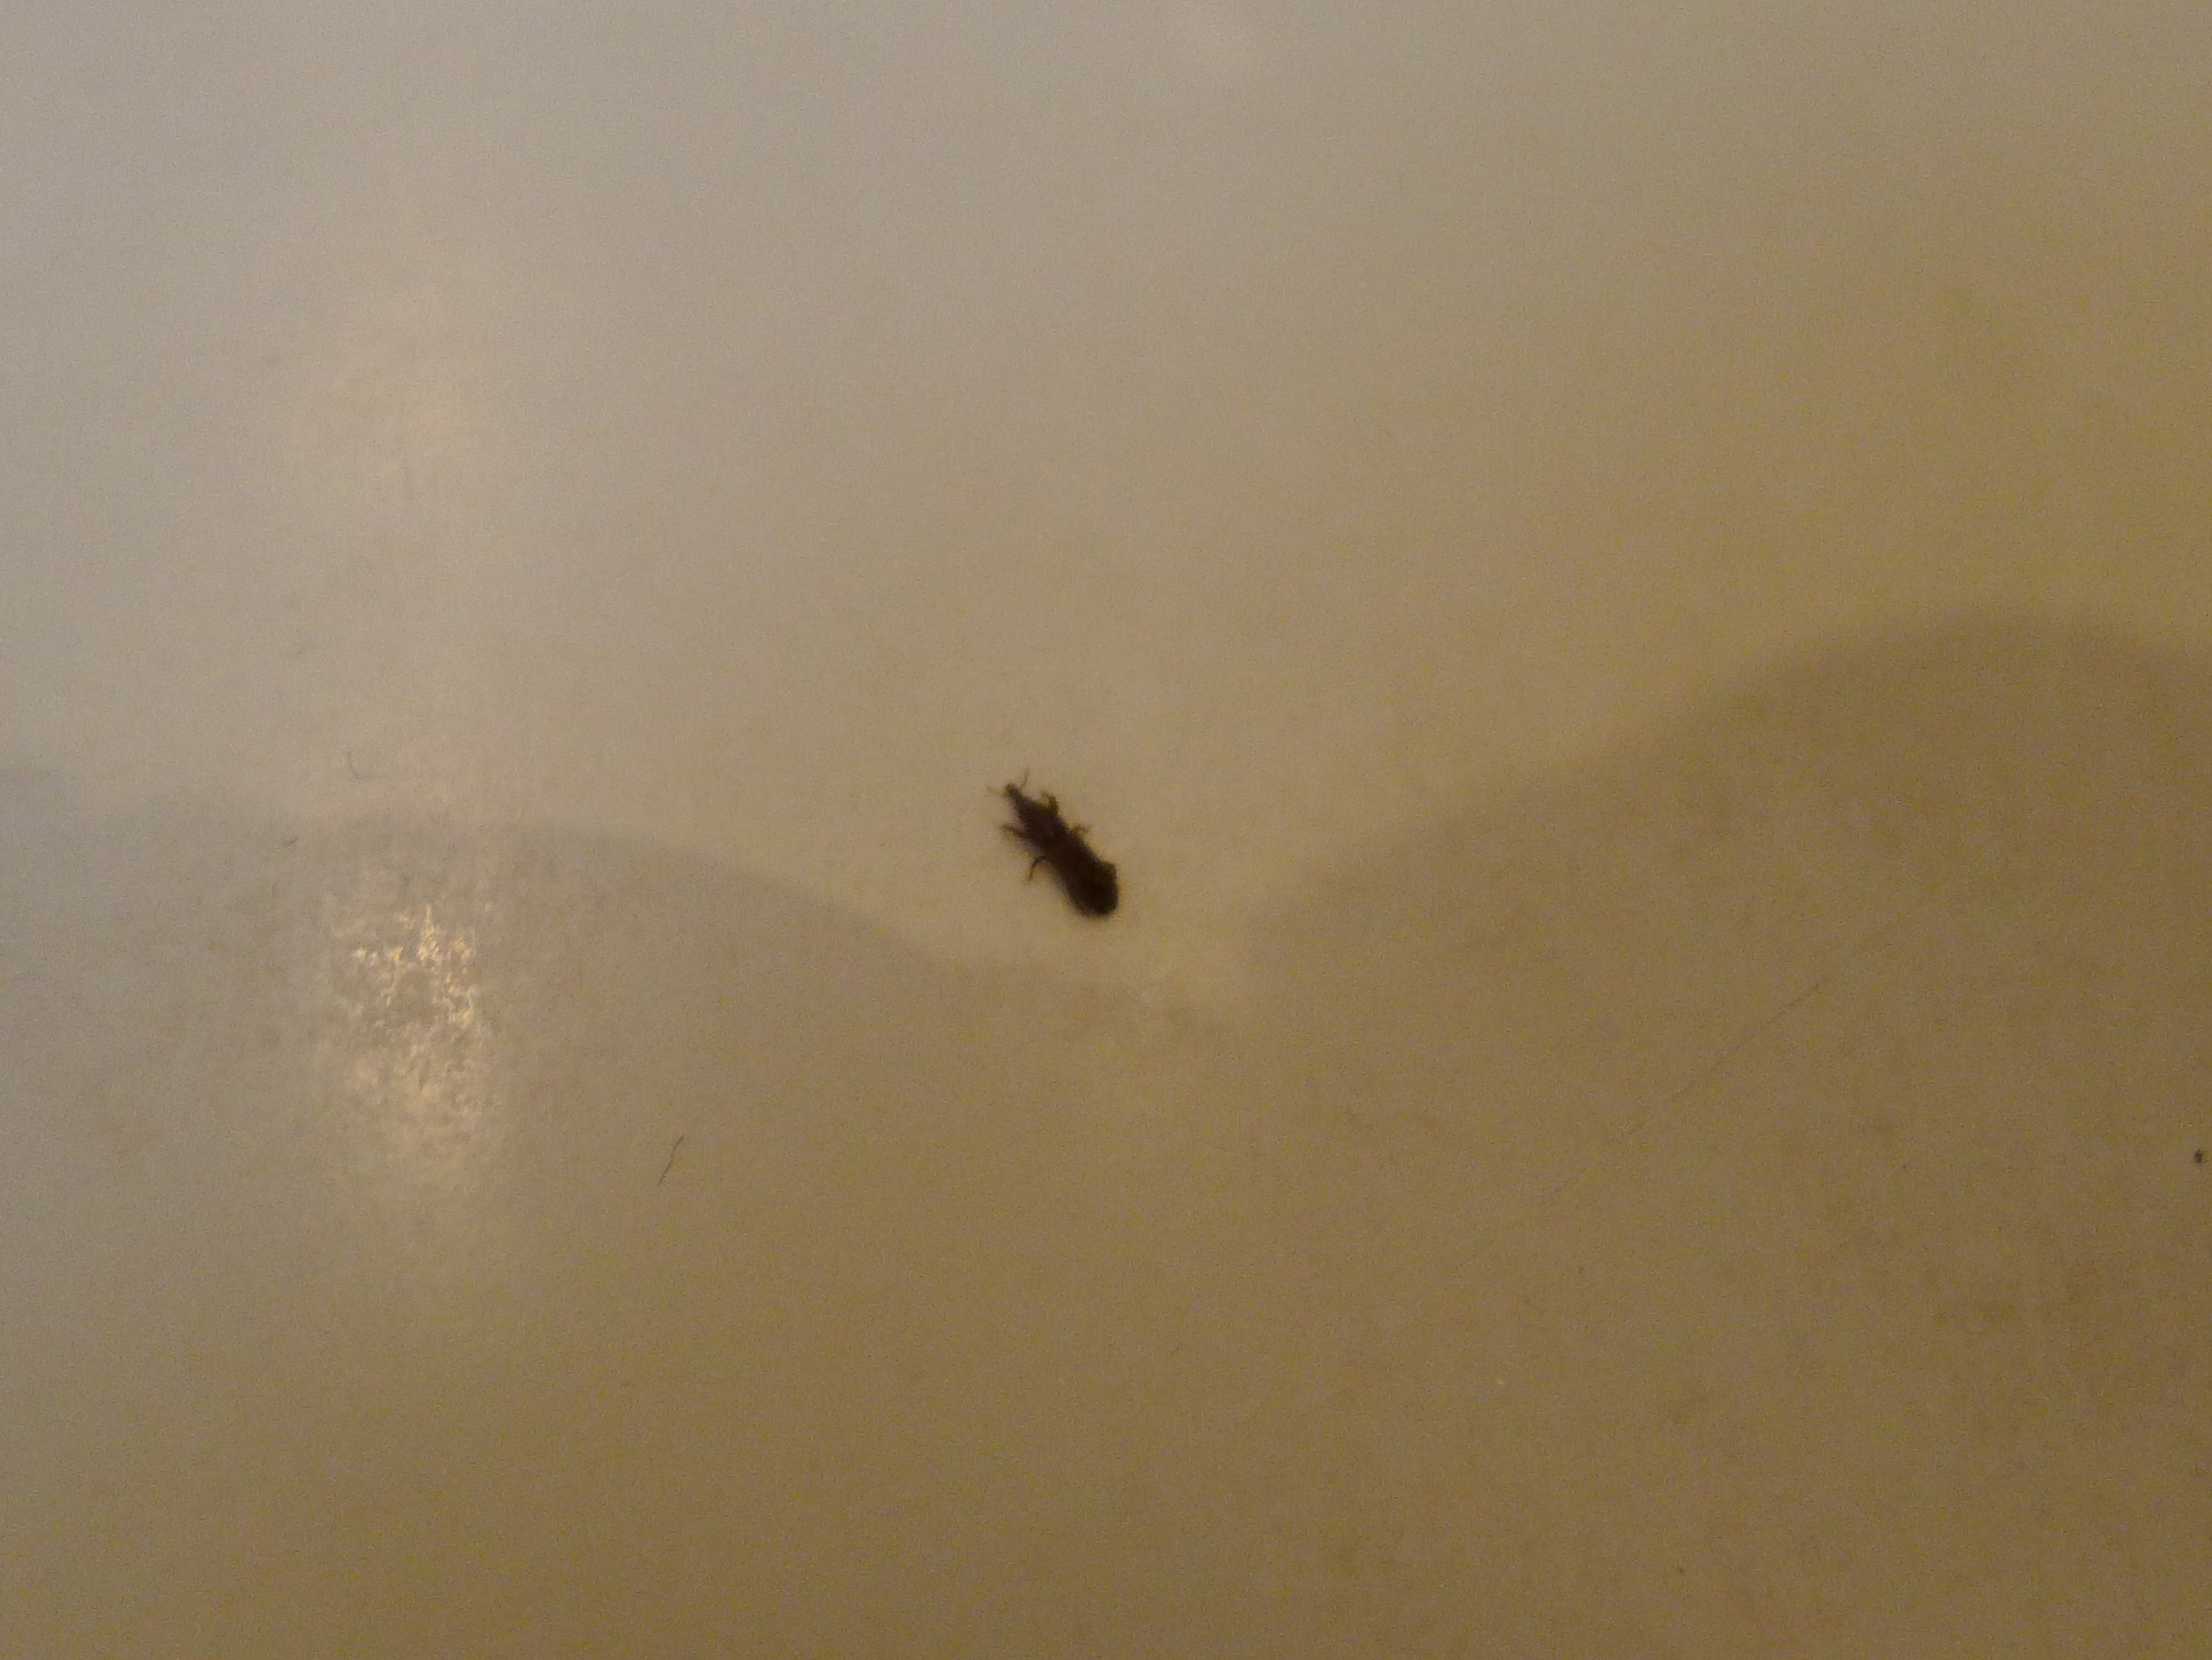 Small Bugs In Bathroom
 Getting Rid Get Rid Springtails In Tub bedbugs